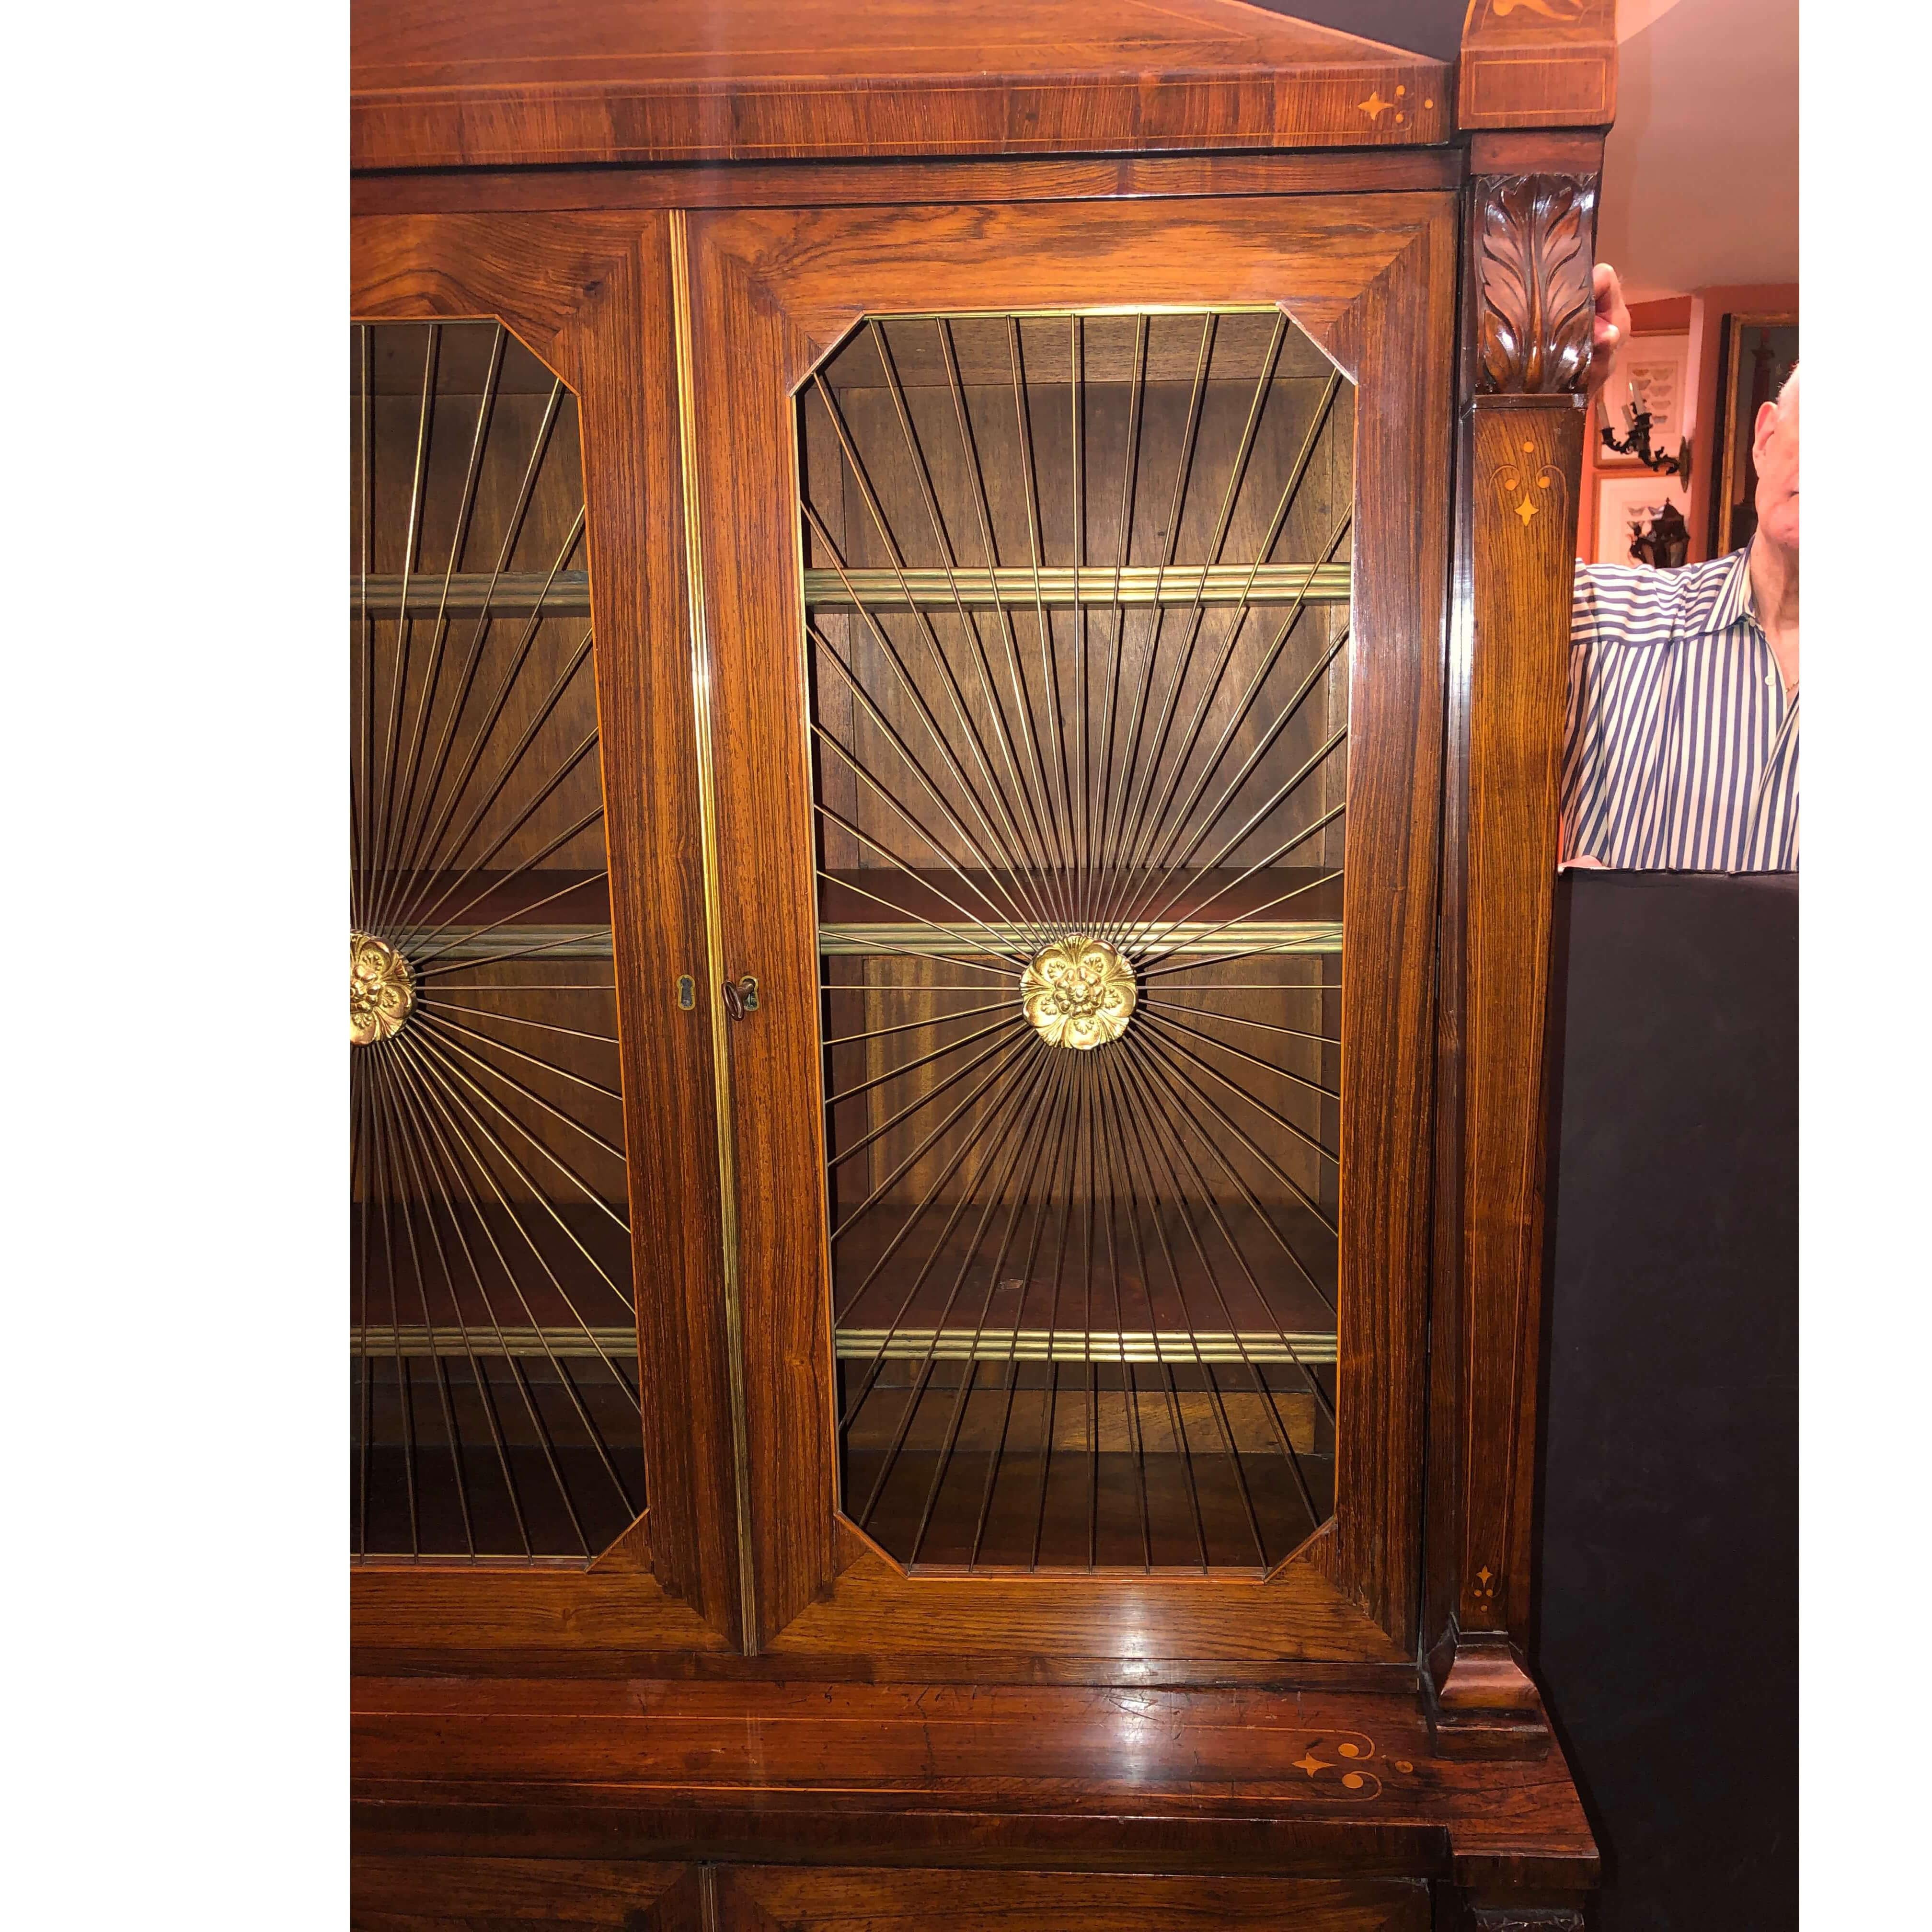 An unusual petite Regency rosewood grill door bookcase in the Neo Egyptian style with pediment top, satinwood line inlay and palmettes with brass trim, brass grills and rondelles. The lower cabinet with paneled closed doors also having satinwood